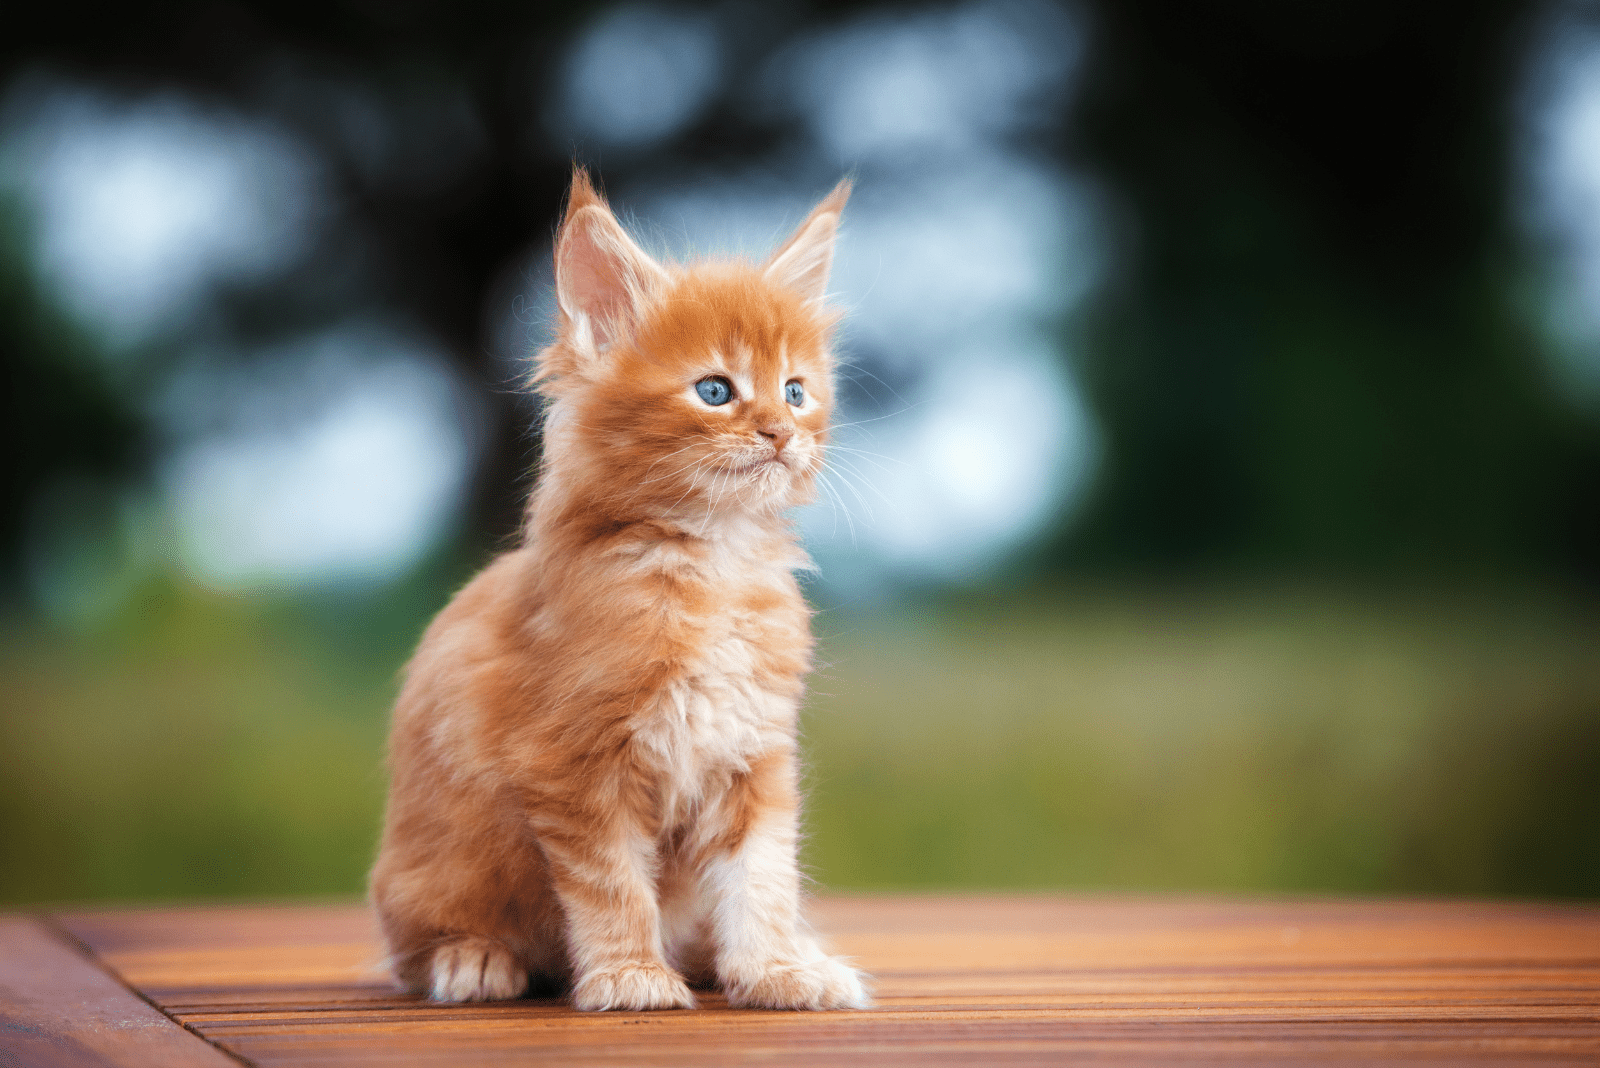 Maine Coon kitten sits and looks around